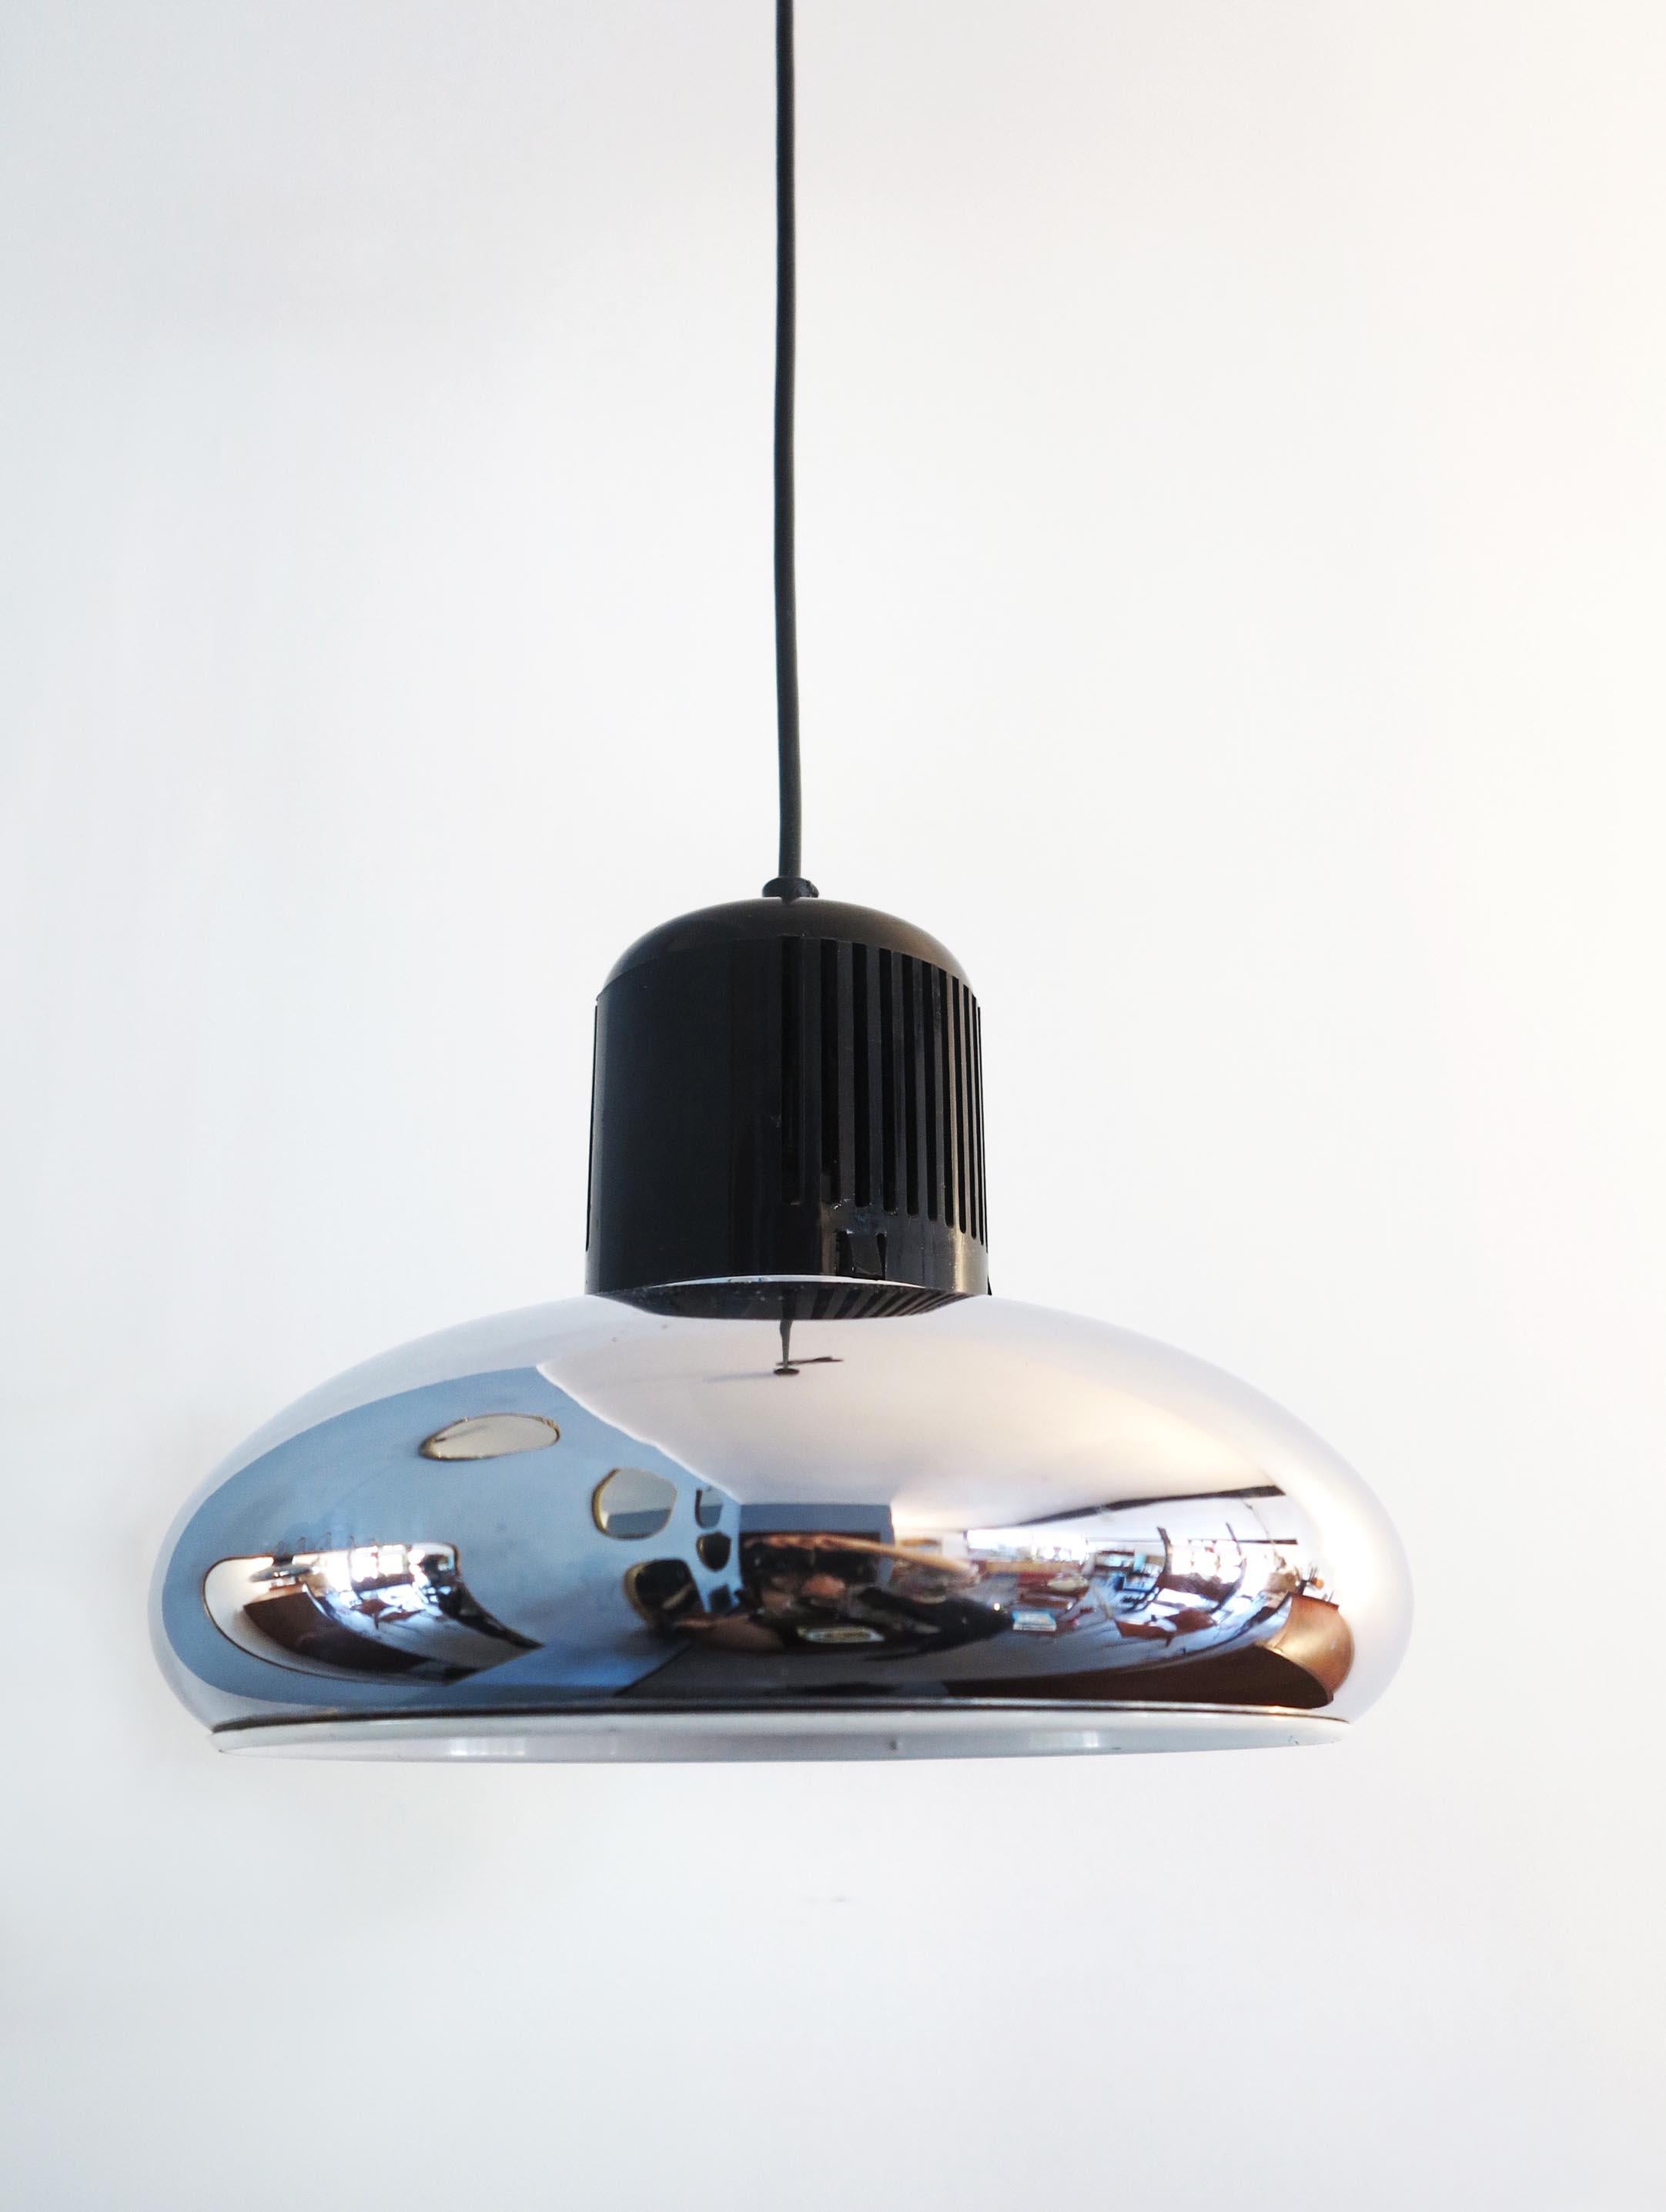 Amazing ceiling lamp by Stilnovo designed by Gae Aulenti in 1960s.
There is the original impressed name of the brand 